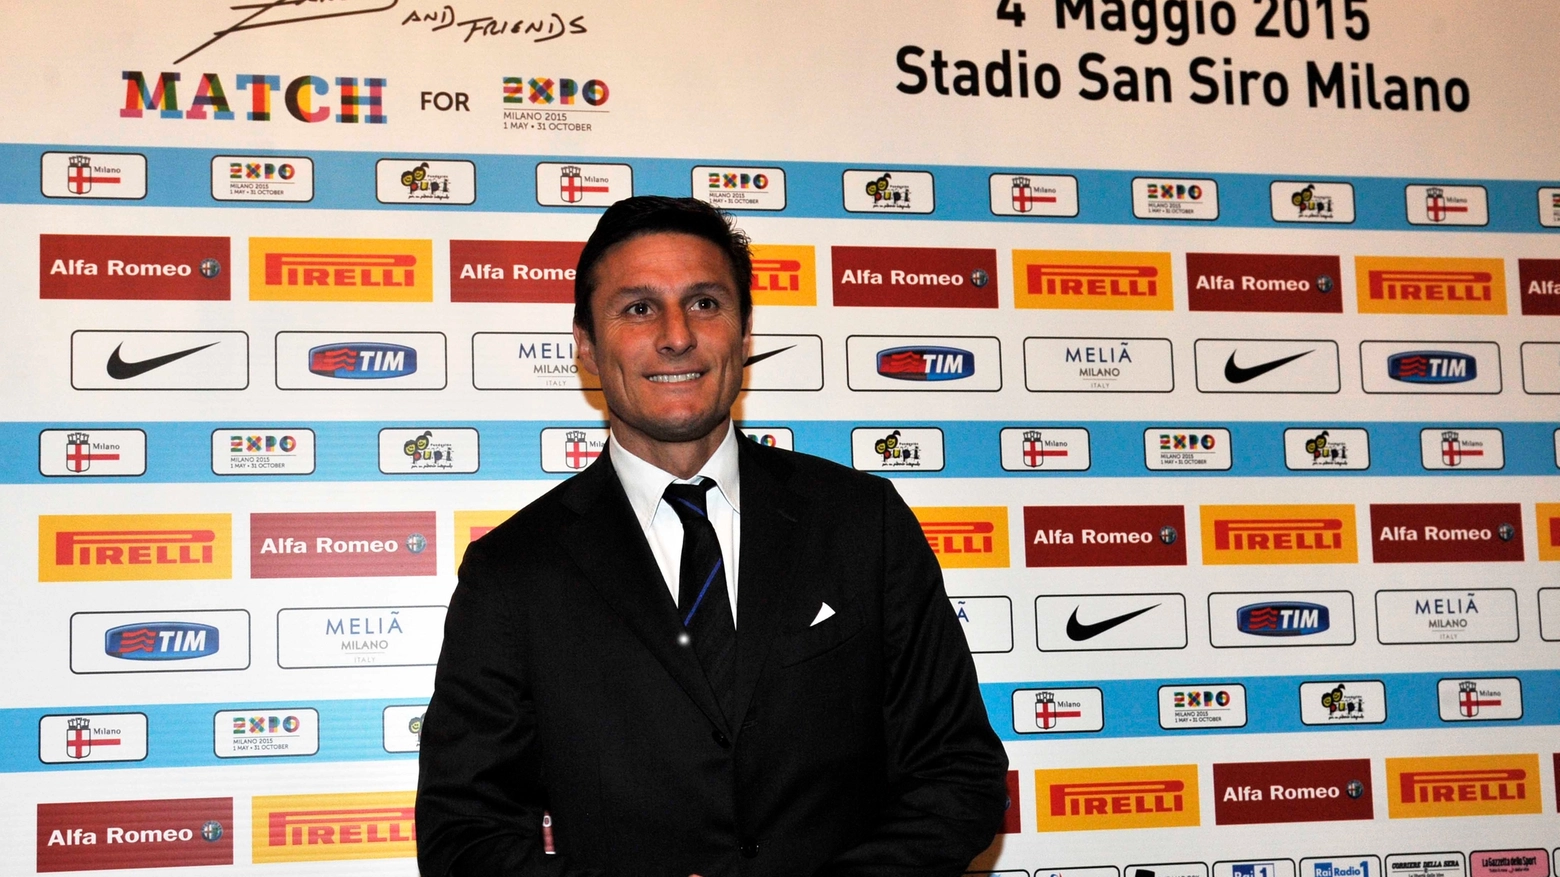 ZANETTI AND FRIENDS MATCH FOR EXPO